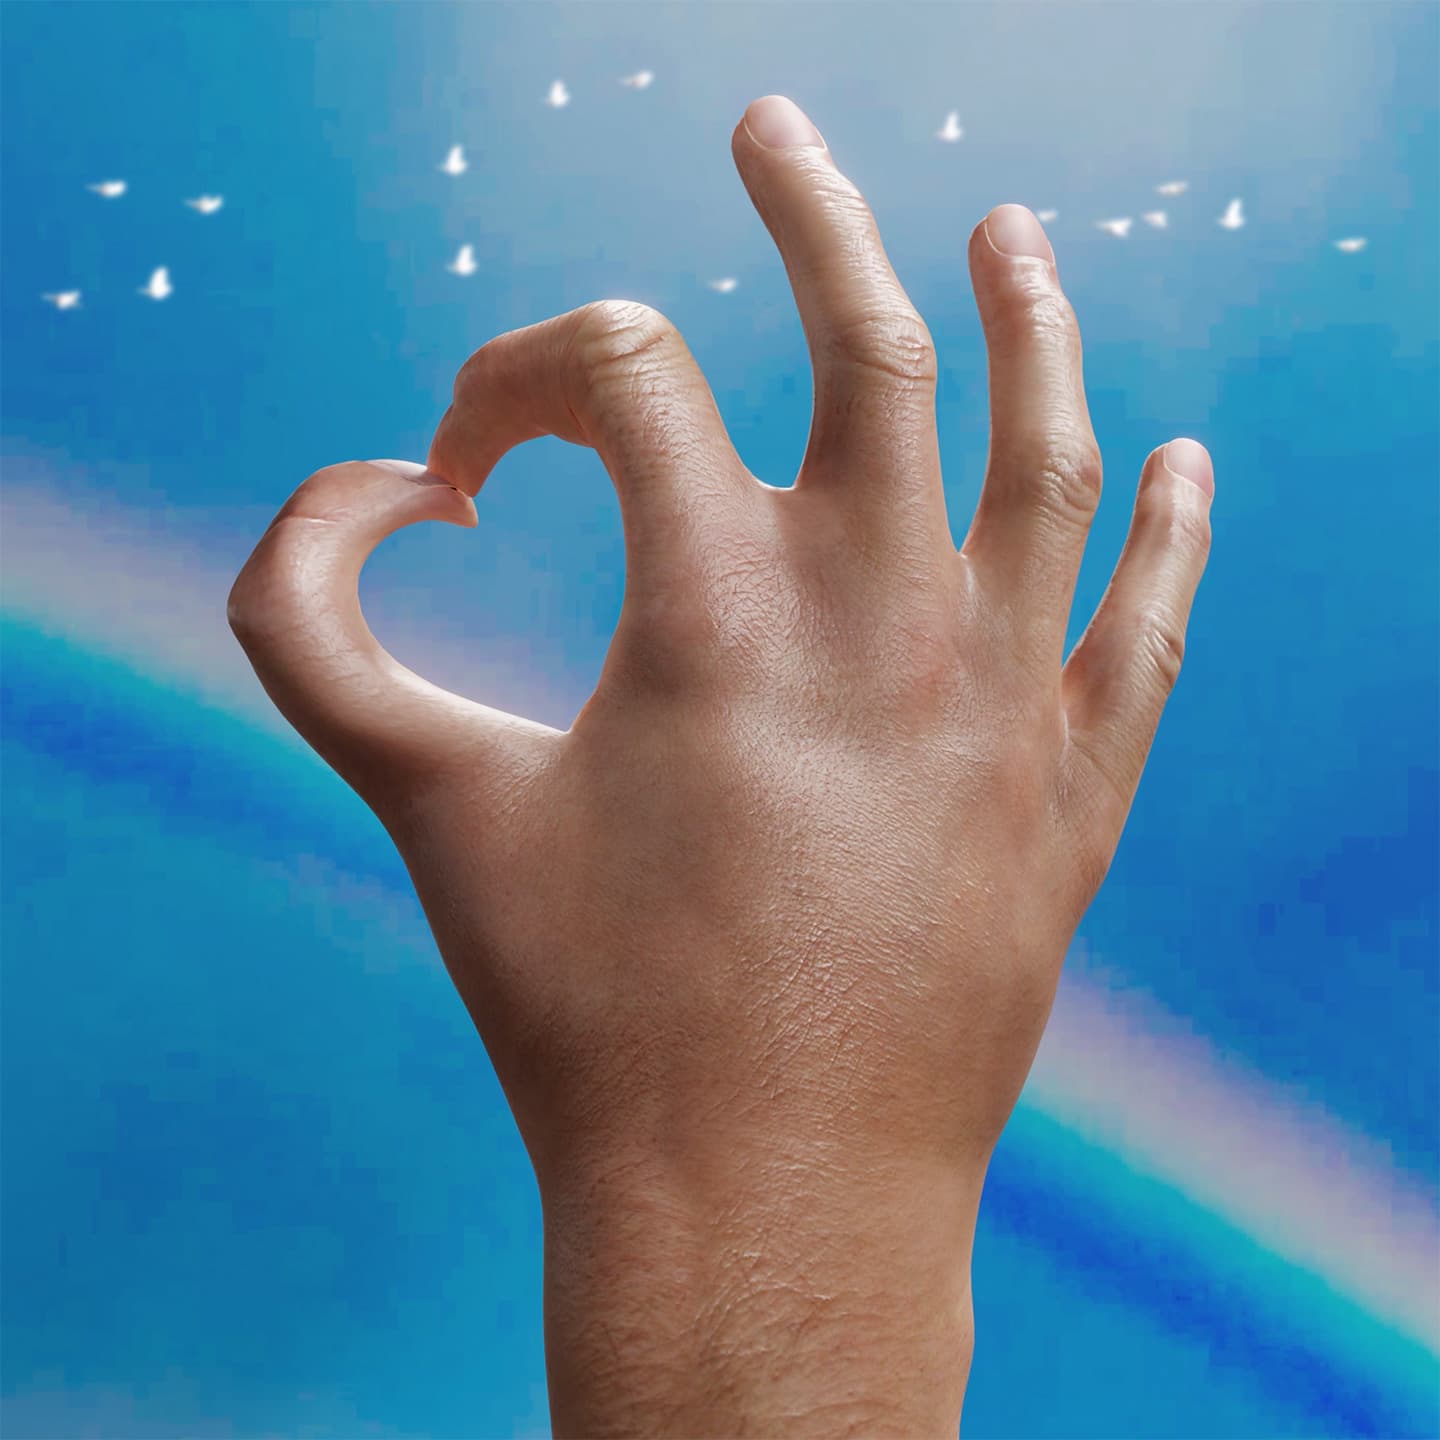 CGI image of a hand showing a heart sign with a rainbow background